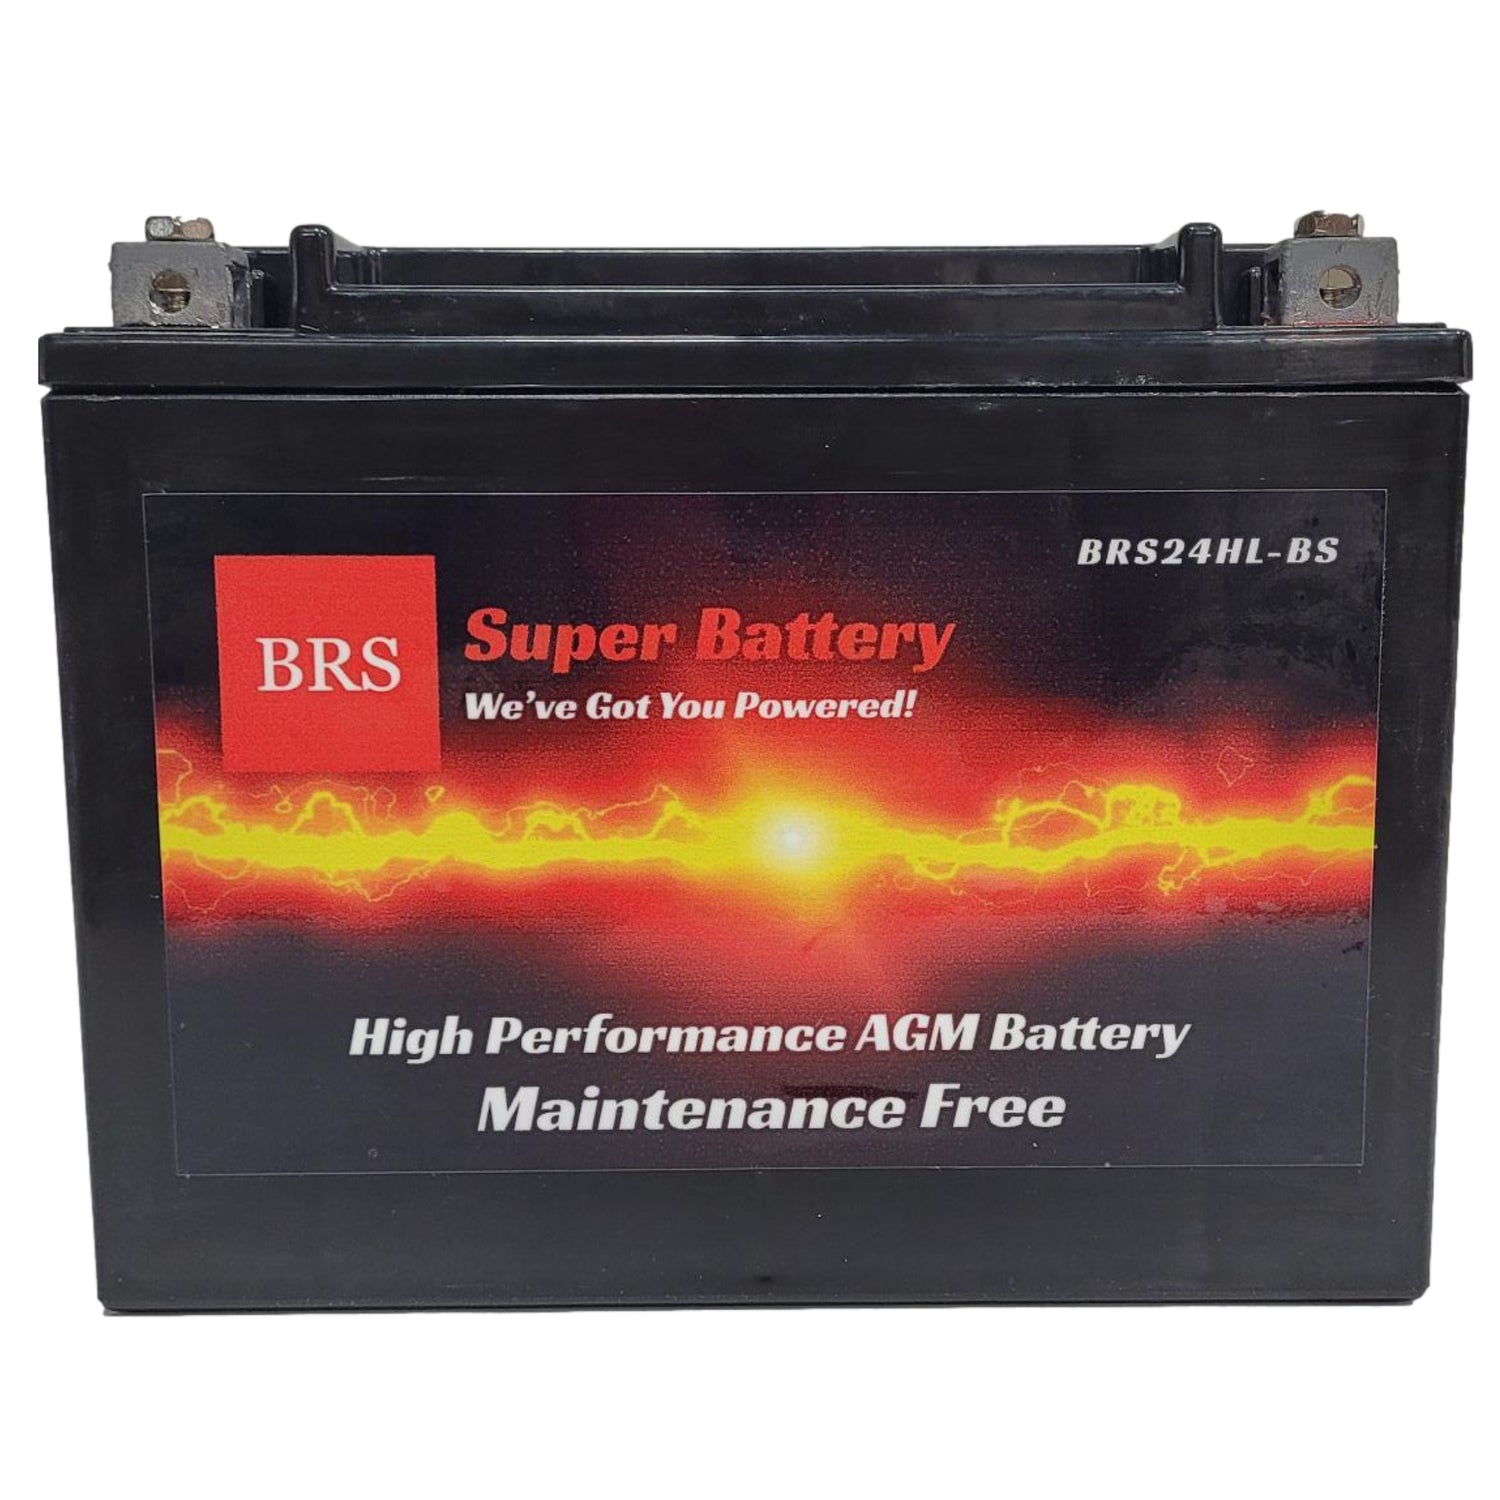 WPX24HL-BS 12v High Performance Sealed AGM PowerSport 2 Year Battery - BRS Super Battery